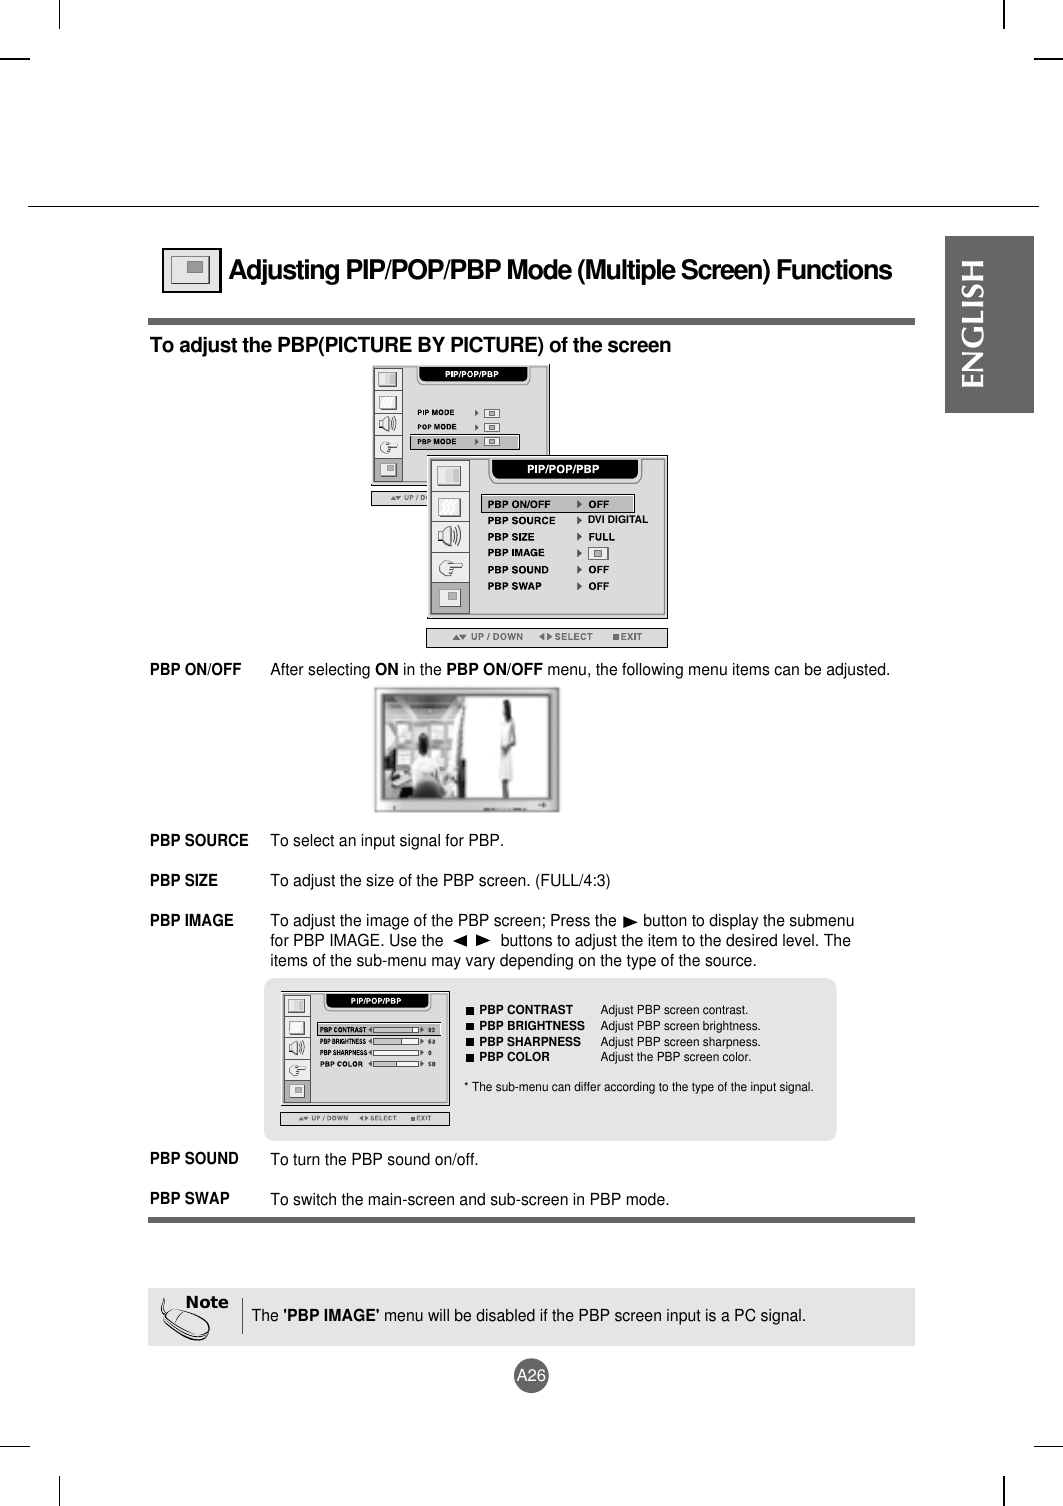 A26ENGLISHAdjusting PIP/POP/PBP Mode (Multiple Screen) FunctionsTo adjust the PBP(PICTURE BY PICTURE) of the screenDVI DIGITALAfter selecting ON in the PBP ON/OFF menu, the following menu items can be adjusted.PBP ON/OFFTo select an input signal for PBP.To adjust the size of the PBP screen. (FULL/4:3)To adjust the image of the PBP screen; Press the      button to display the submenufor PBP IMAGE. Use the             buttons to adjust the item to the desired level. Theitems of the sub-menu may vary depending on the type of the source.PBP SOURCEPBP SIZEPBP IMAGETo turn the PBP sound on/off.To switch the main-screen and sub-screen in PBP mode.PBP SOUNDPBP SWAPPBP CONTRAST Adjust PBP screen contrast.PBP BRIGHTNESS Adjust PBP screen brightness.PBP SHARPNESS Adjust PBP screen sharpness.PBP COLOR Adjust the PBP screen color.* The sub-menu can differ according to the type of the input signal.NoteThe &apos;PBP IMAGE&apos; menu will be disabled if the PBP screen input is a PC signal.